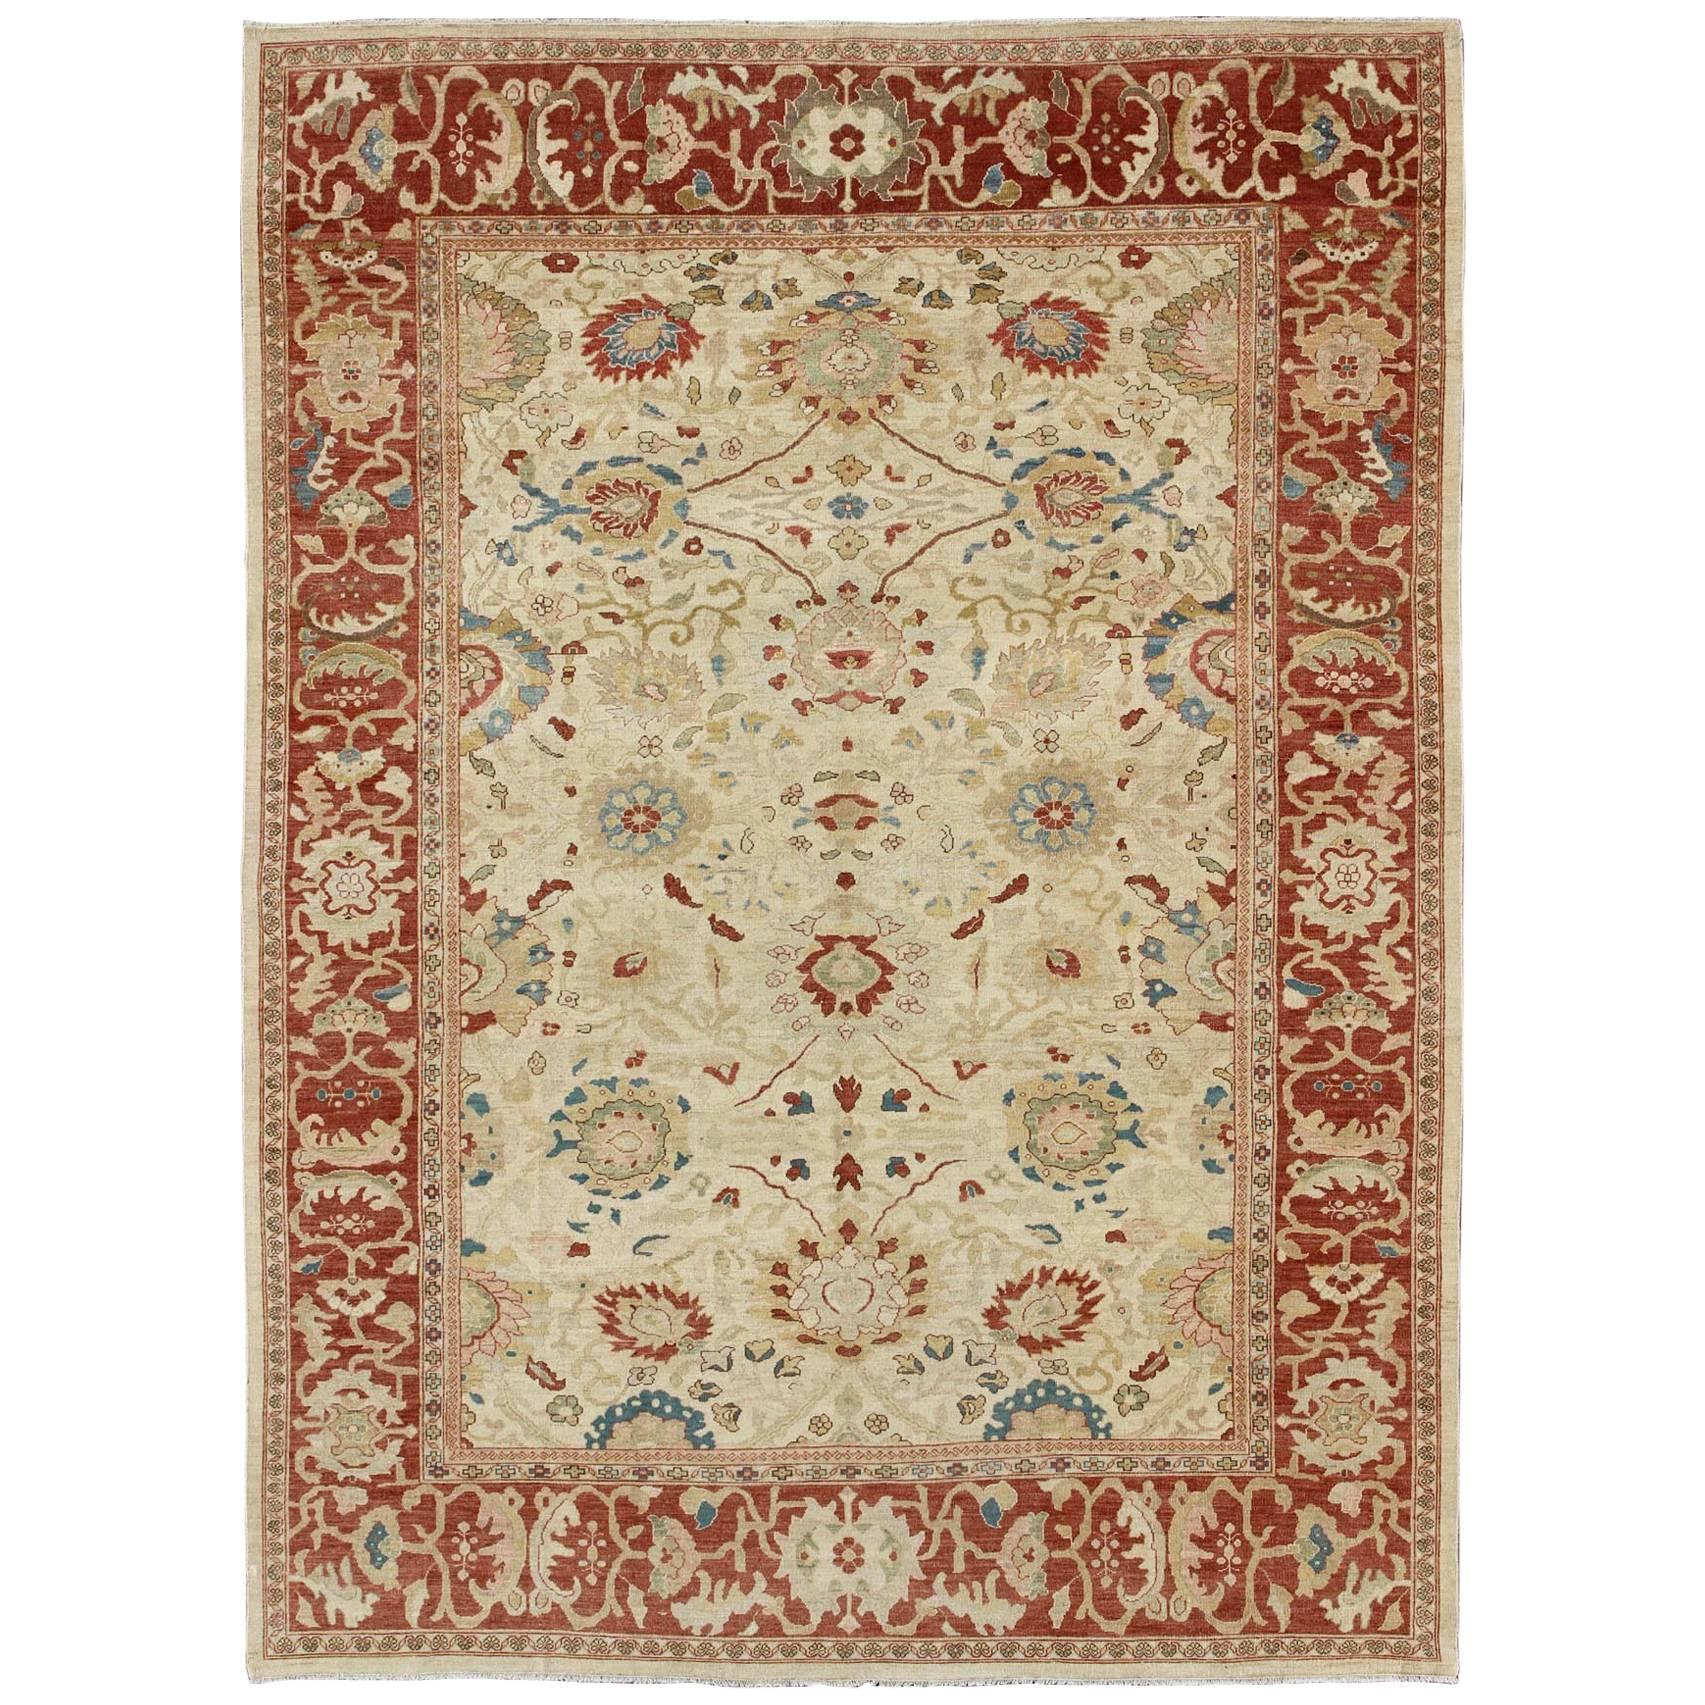 Large Vintage Persian Sultanabad Rug with All-Over Design in Ivory Background